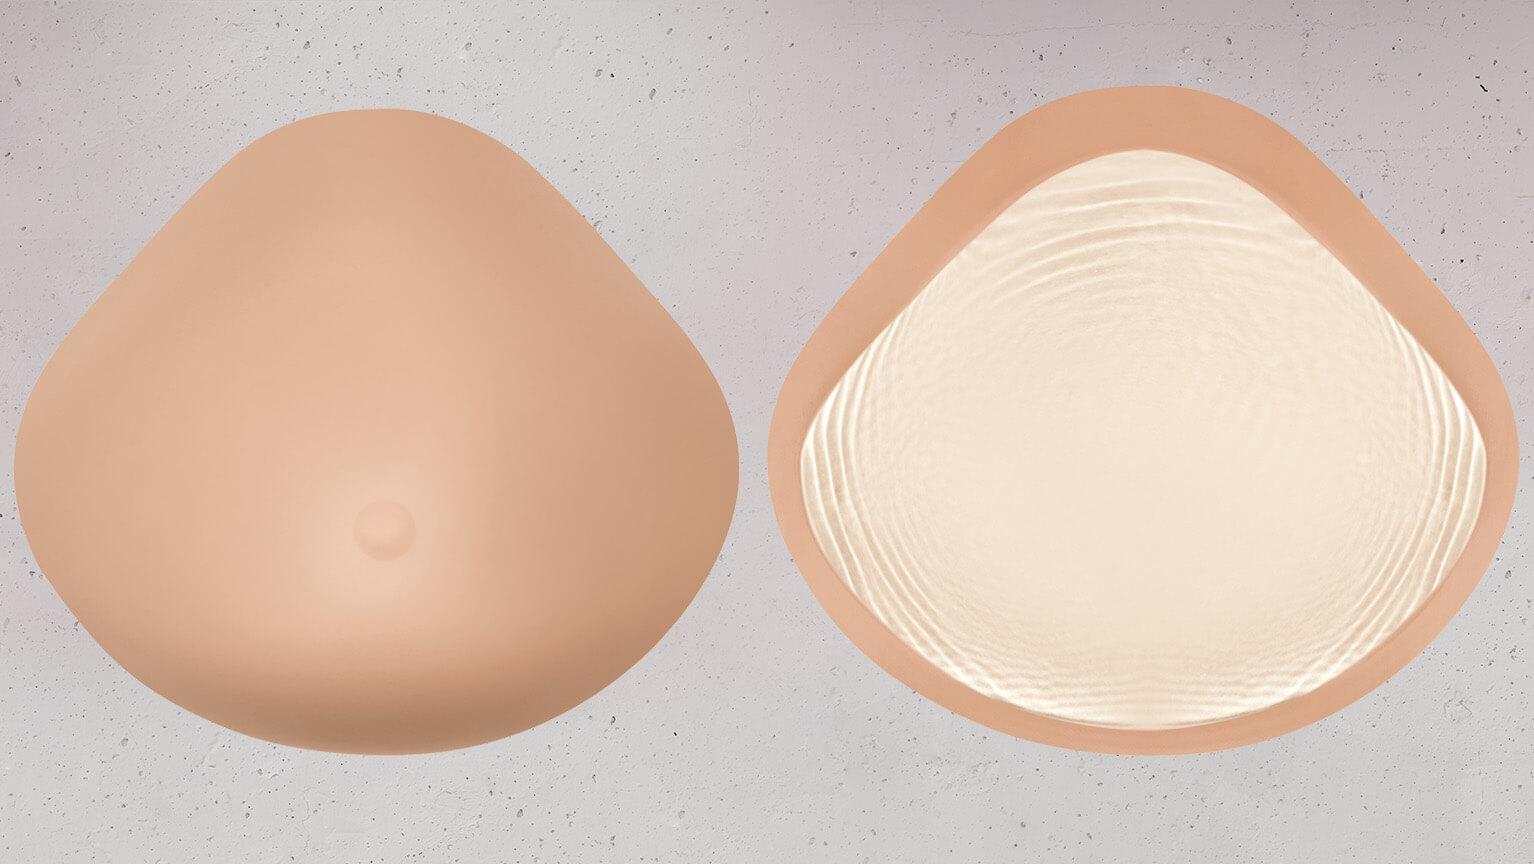 Cosmetic Breast Forms